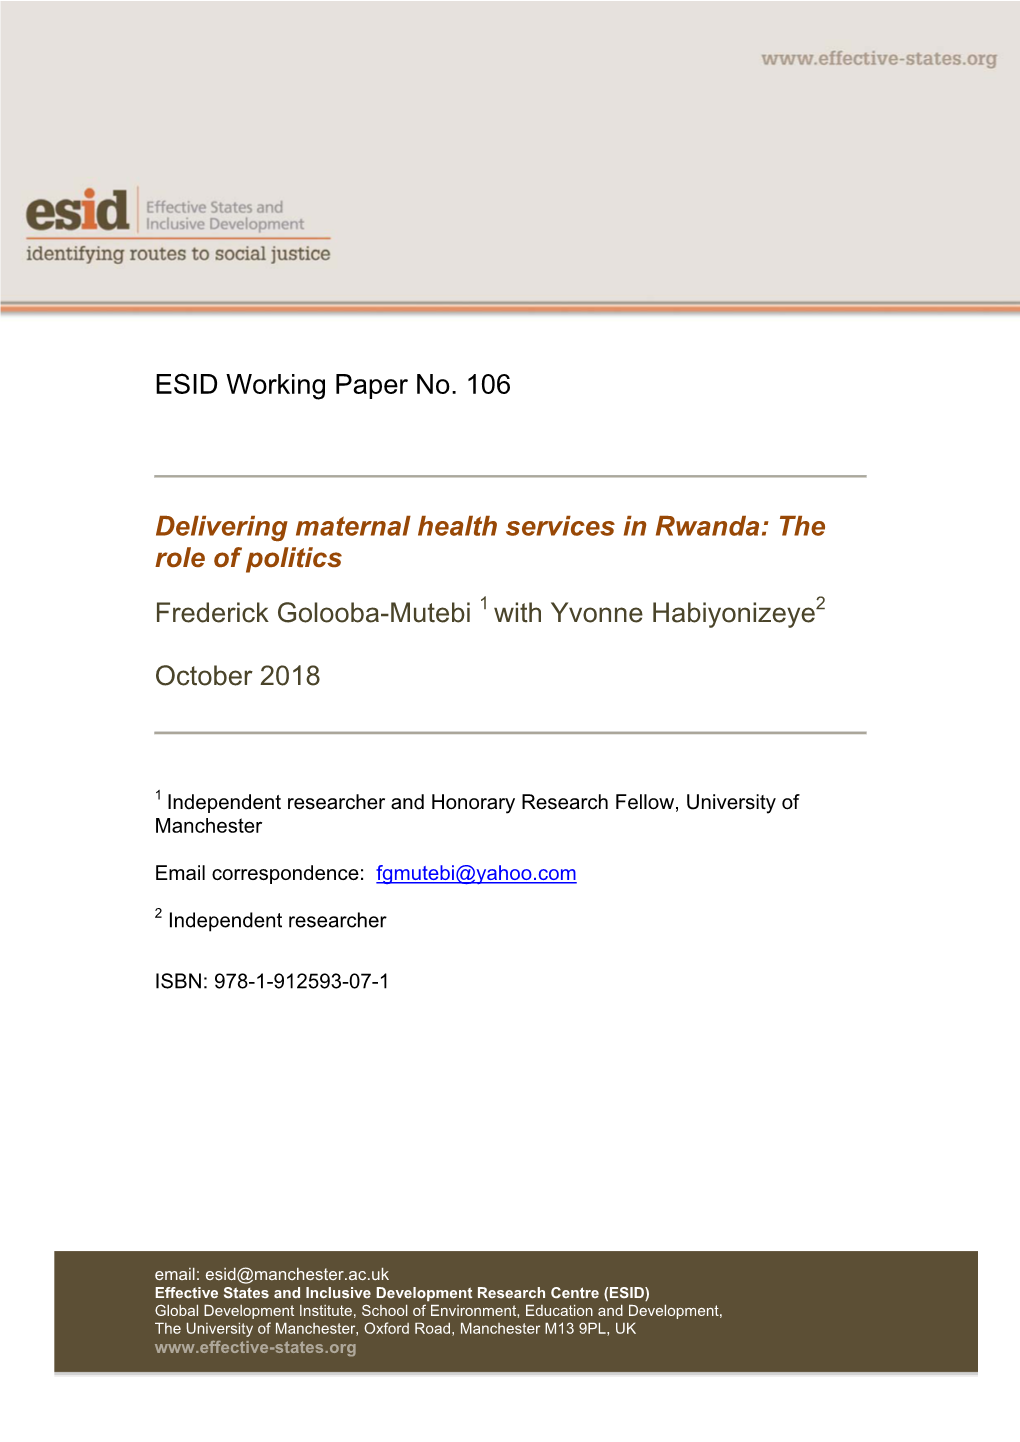 ESID Working Paper No. 106 Delivering Maternal Health Services